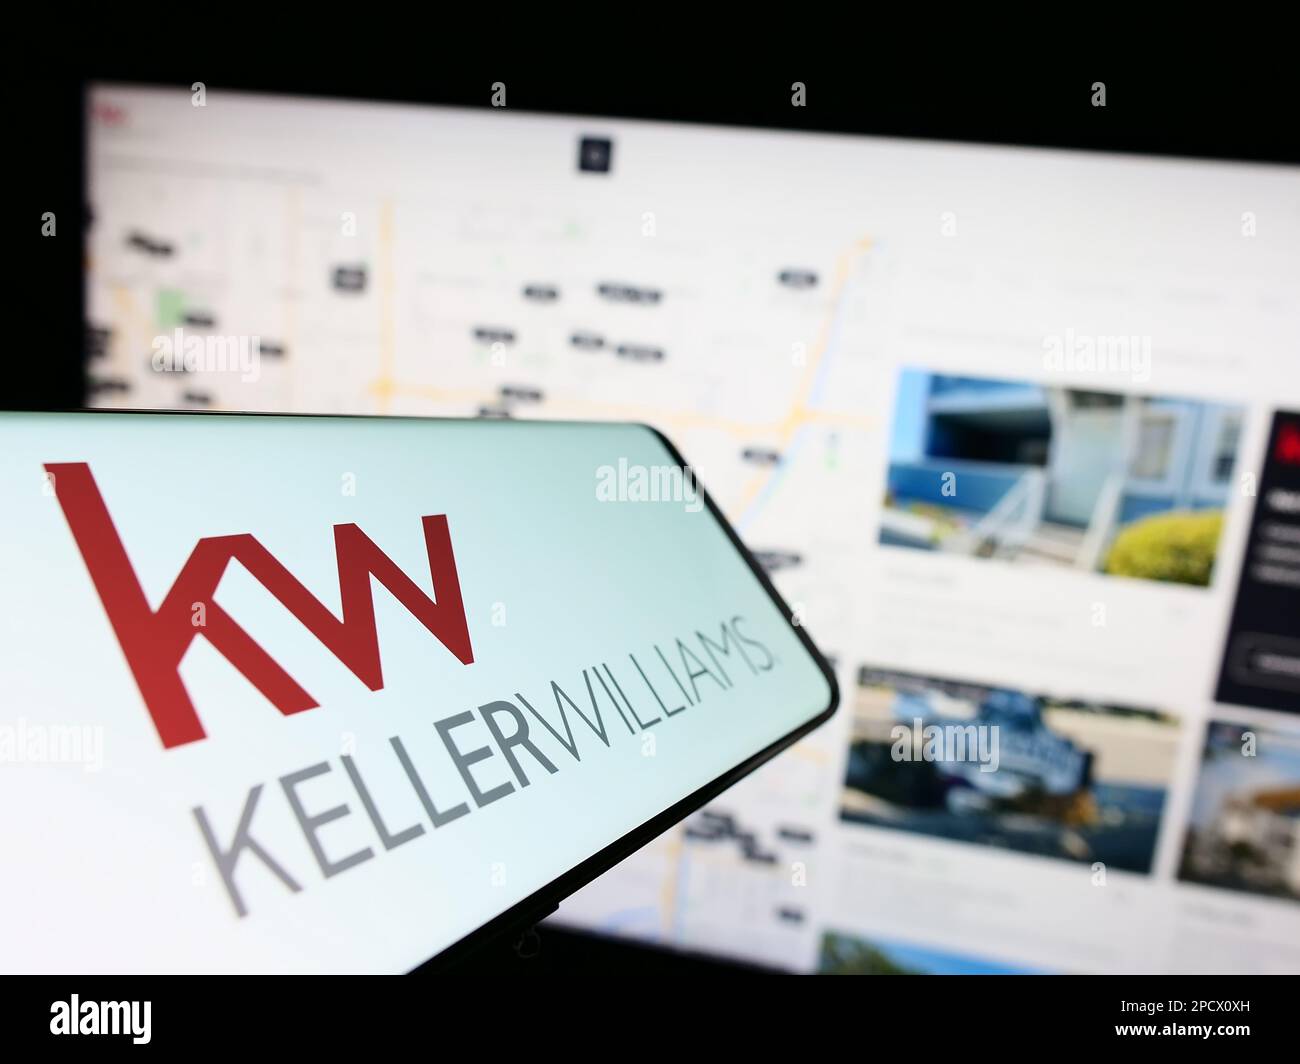 Smartphone with logo of real estate company Keller Williams Realty Inc. on screen in front of website. Focus on center-left of phone display. Stock Photo